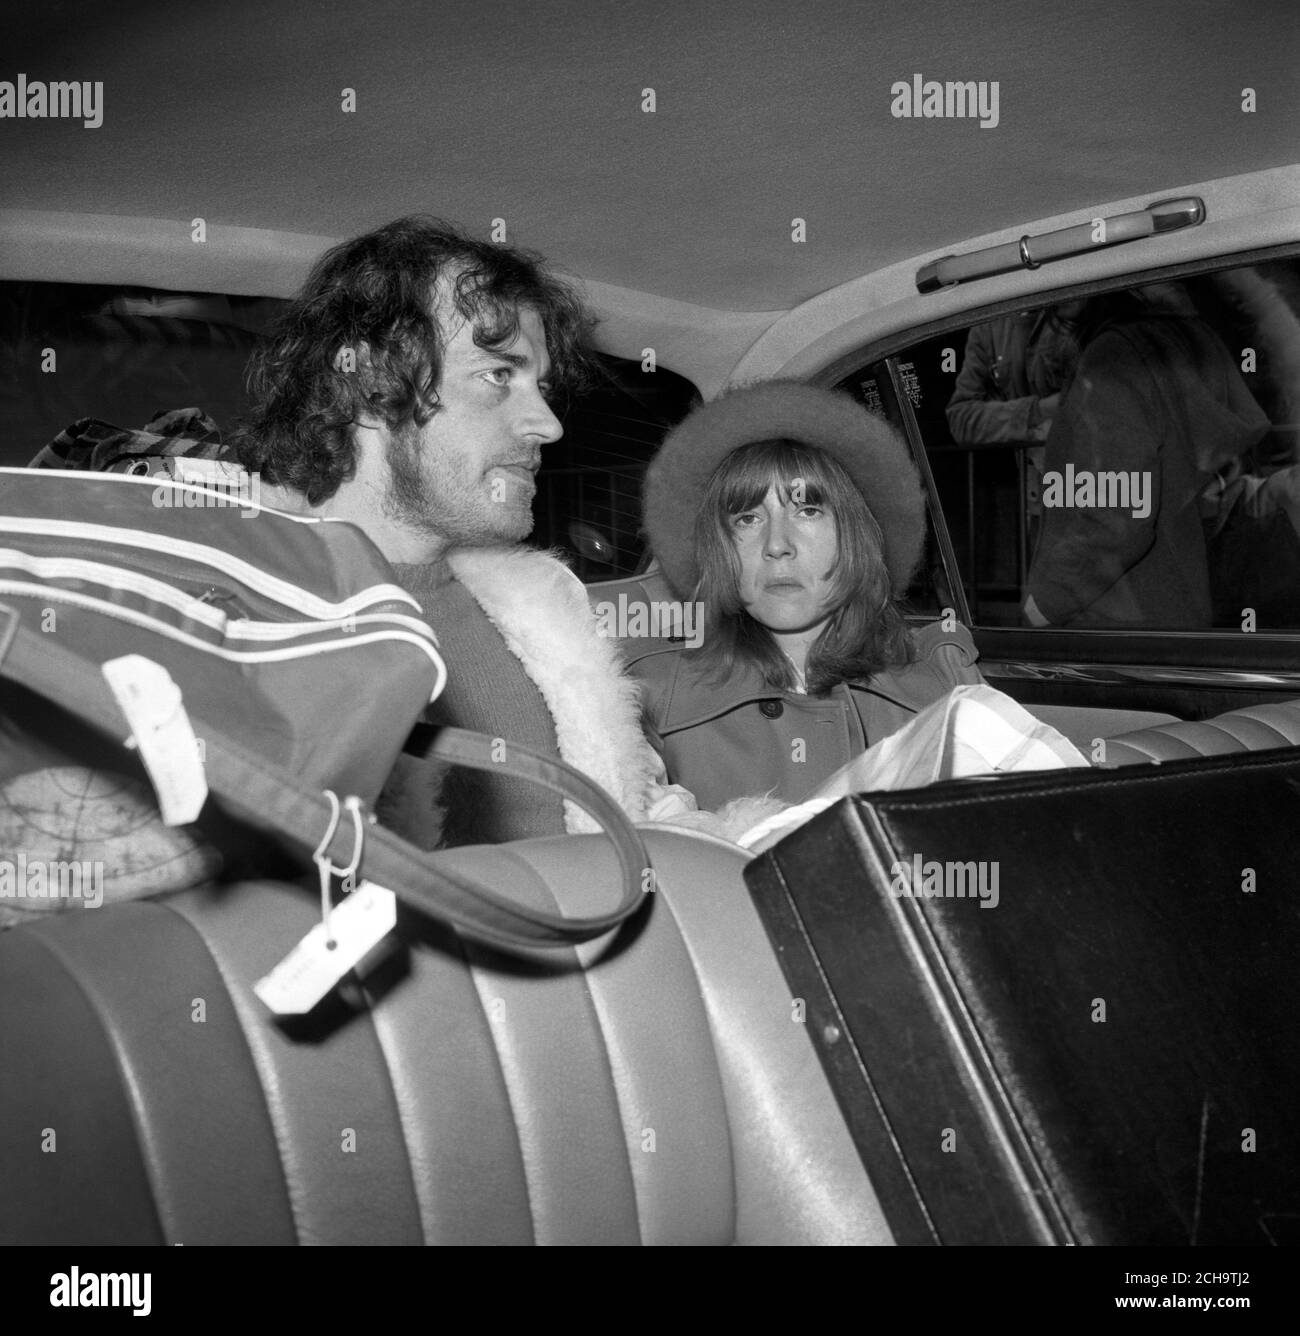 Joe Cocker, the British pop singer who was ordered out of Australia after being convicted of possessing drugs, drives away from Heathrow Airport with his girlfriend Eileen Webster. Stock Photo